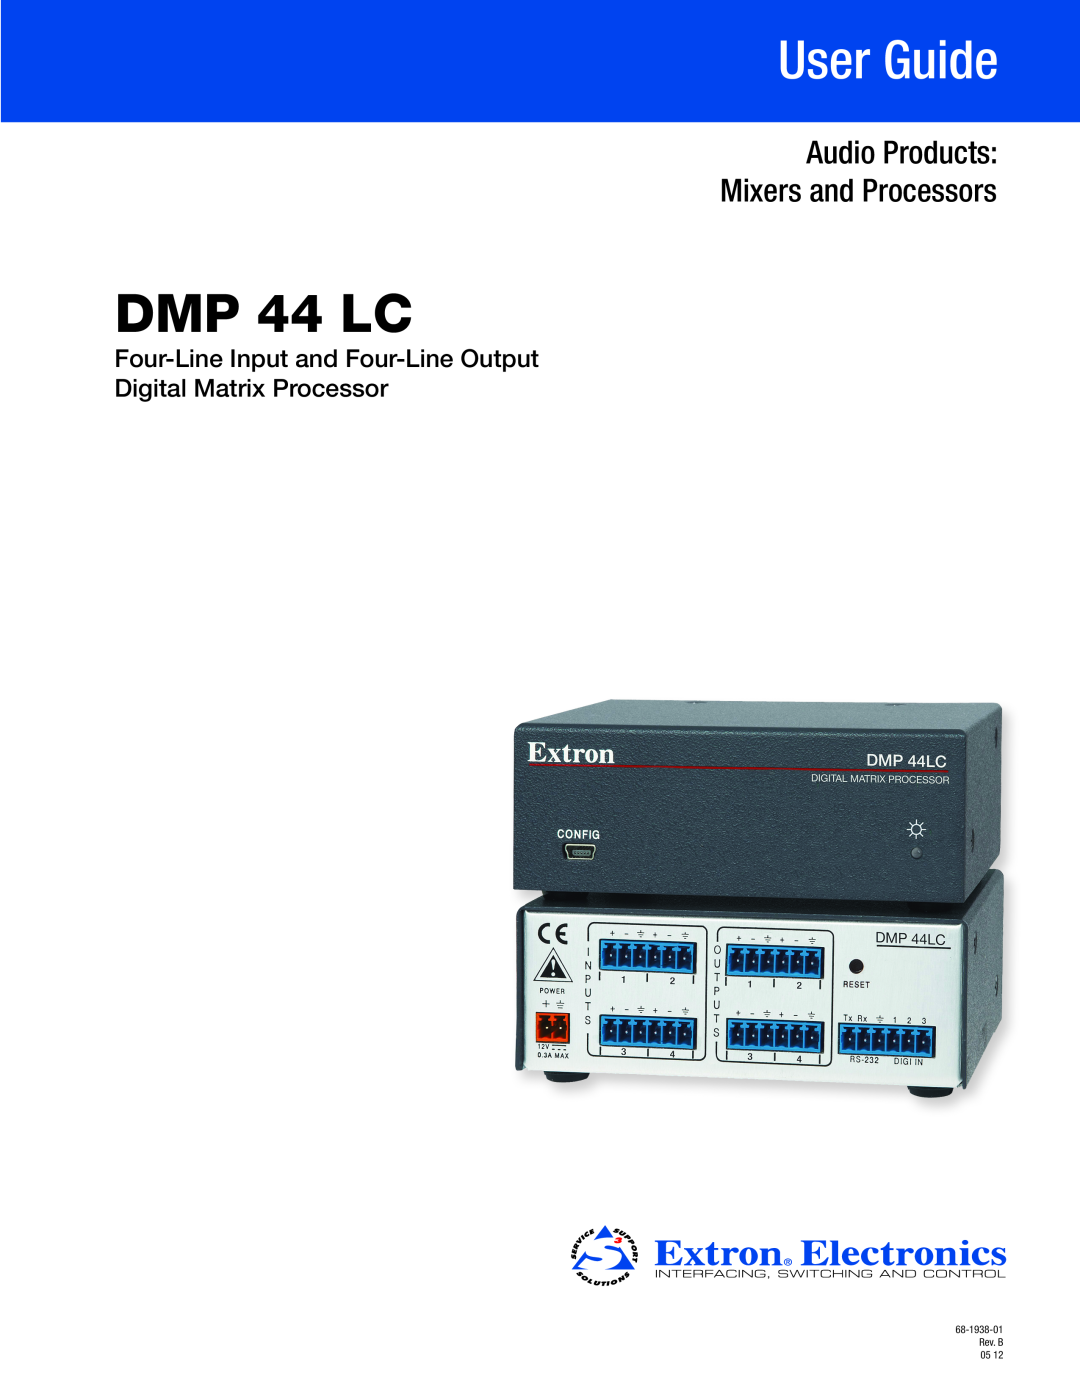 Extron electronic DMP 44 LC manual User Guide, Audio Products Mixers and Processors, Four-LineInput and Four-LineOutput 